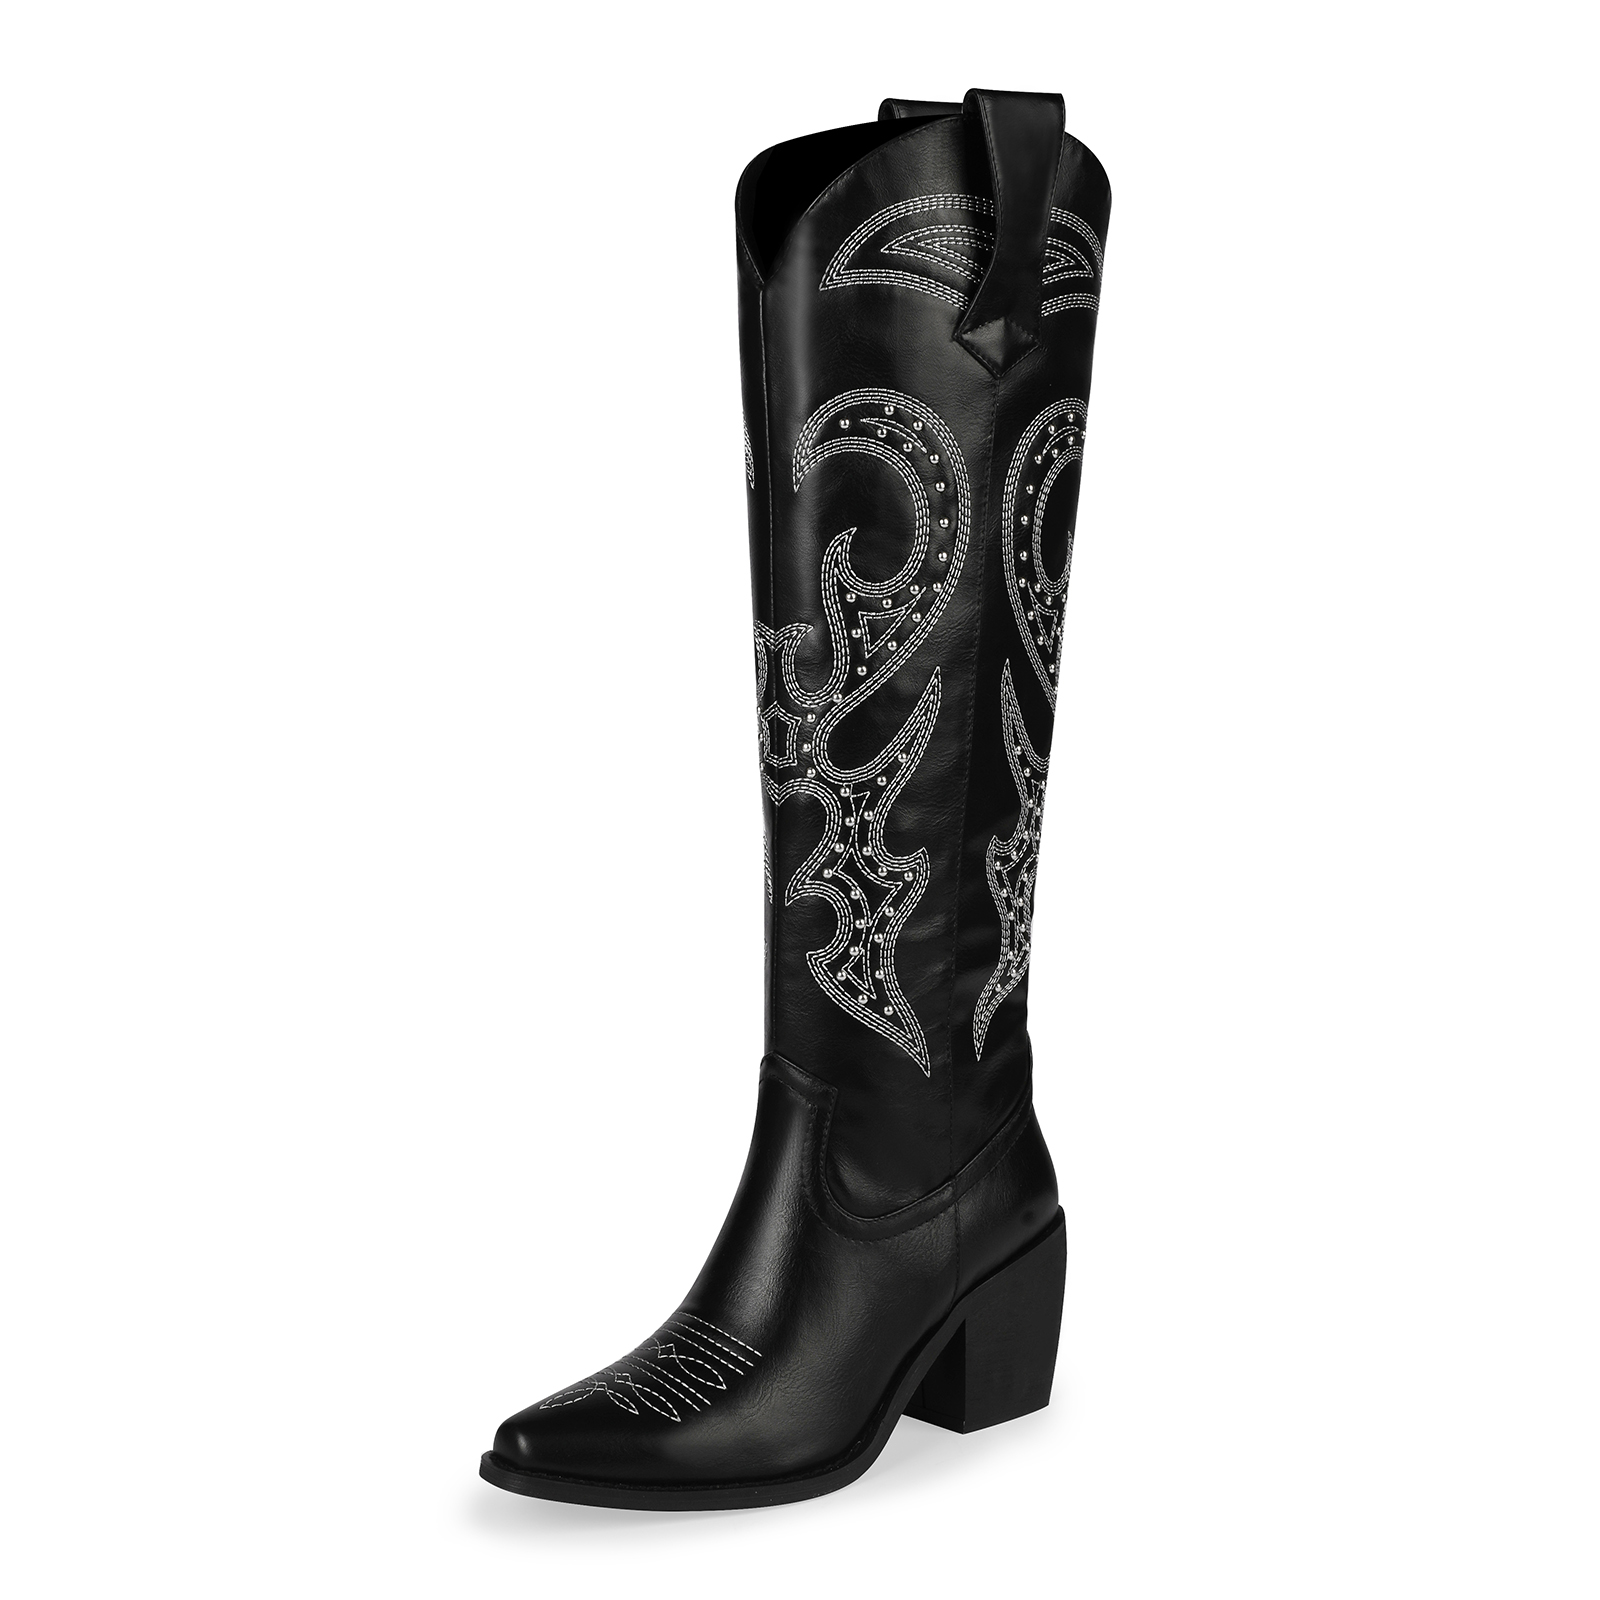 TAAFO Rivets Boots Women Western Black Tall Boots Knee High Women Cowboy Boots With Embroidery